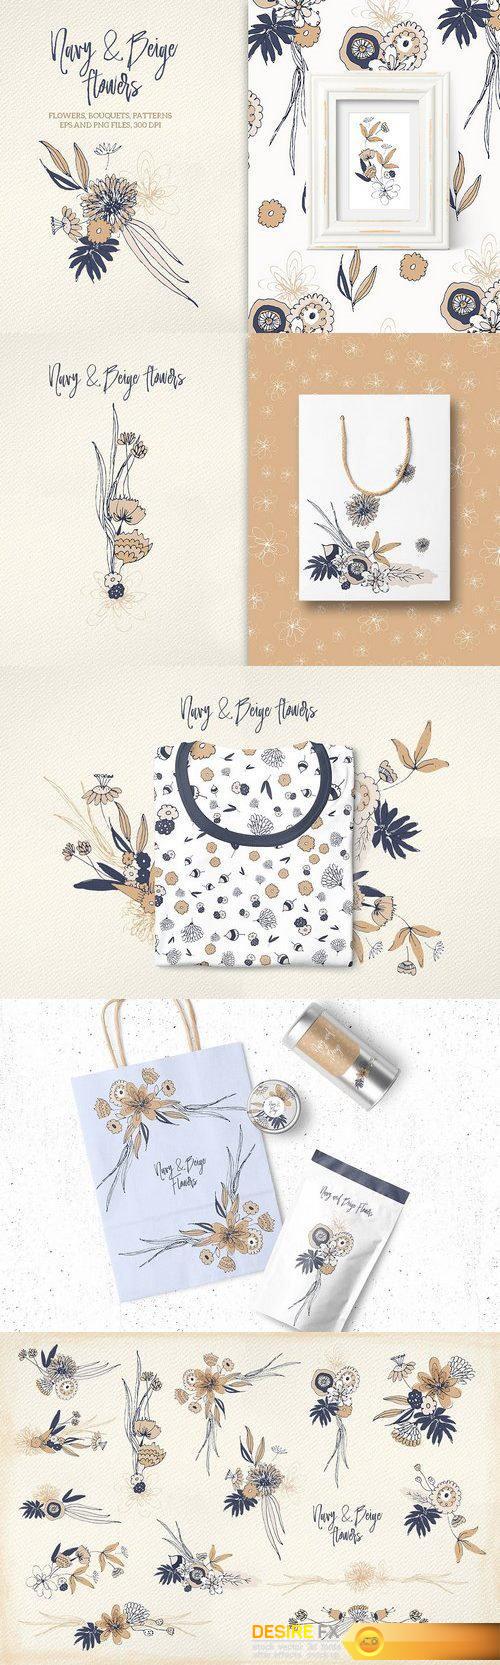 CM - Navy and Beige Flowers 1479843